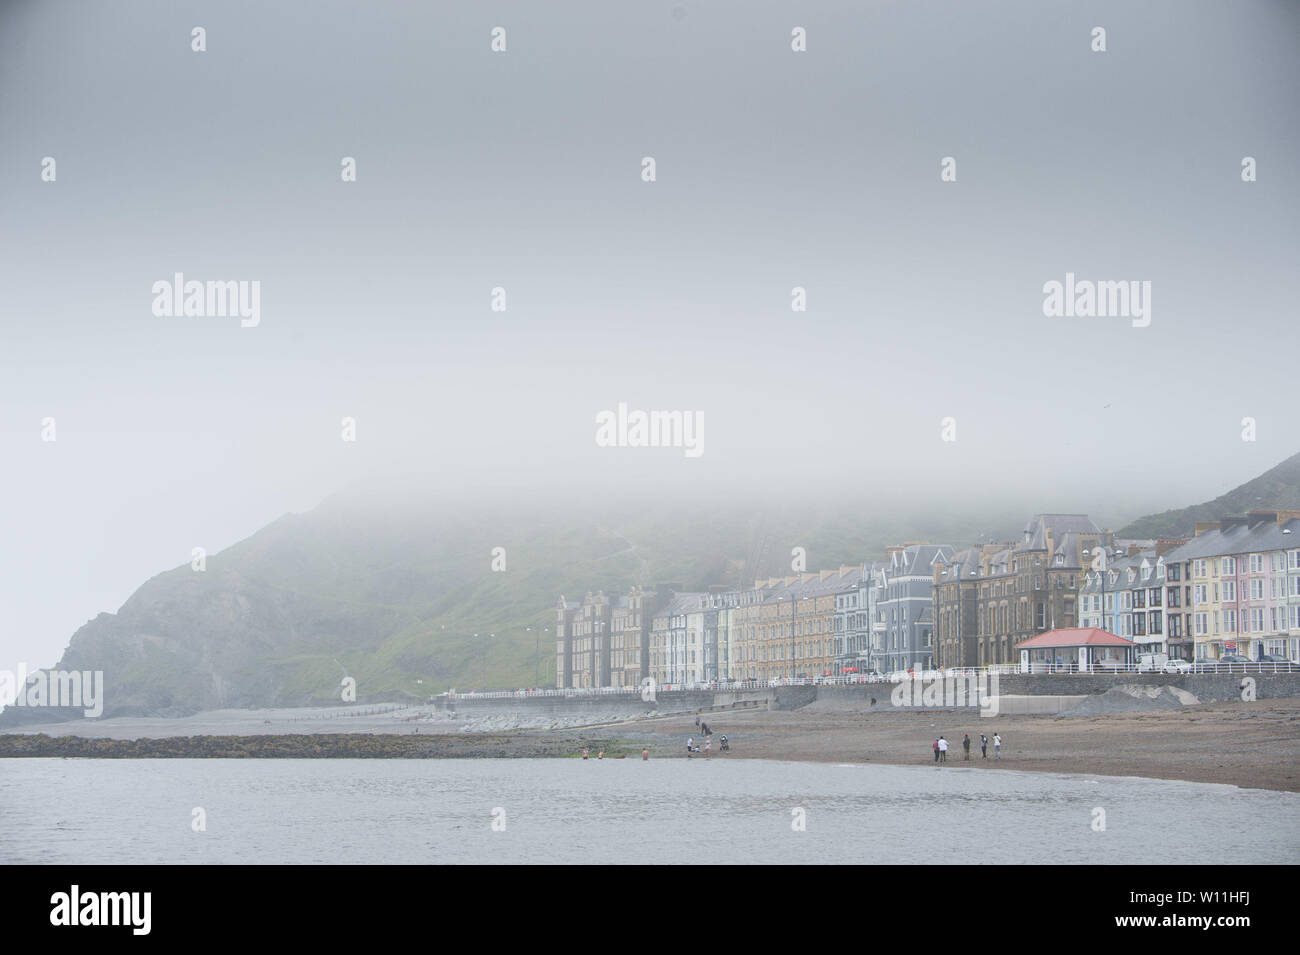 Aberystwyth, Wales, UK. Saturday 29 Jun 2019.  UK weather: As the south east of England is experiencing record breaking hot weather, Aberystwyth on the west coast of Wales is shrouded in low cloud and sea mist, keeping the temperatures substantially cooler.   Photo credit Keith Morris / Alamy Live News Stock Photo